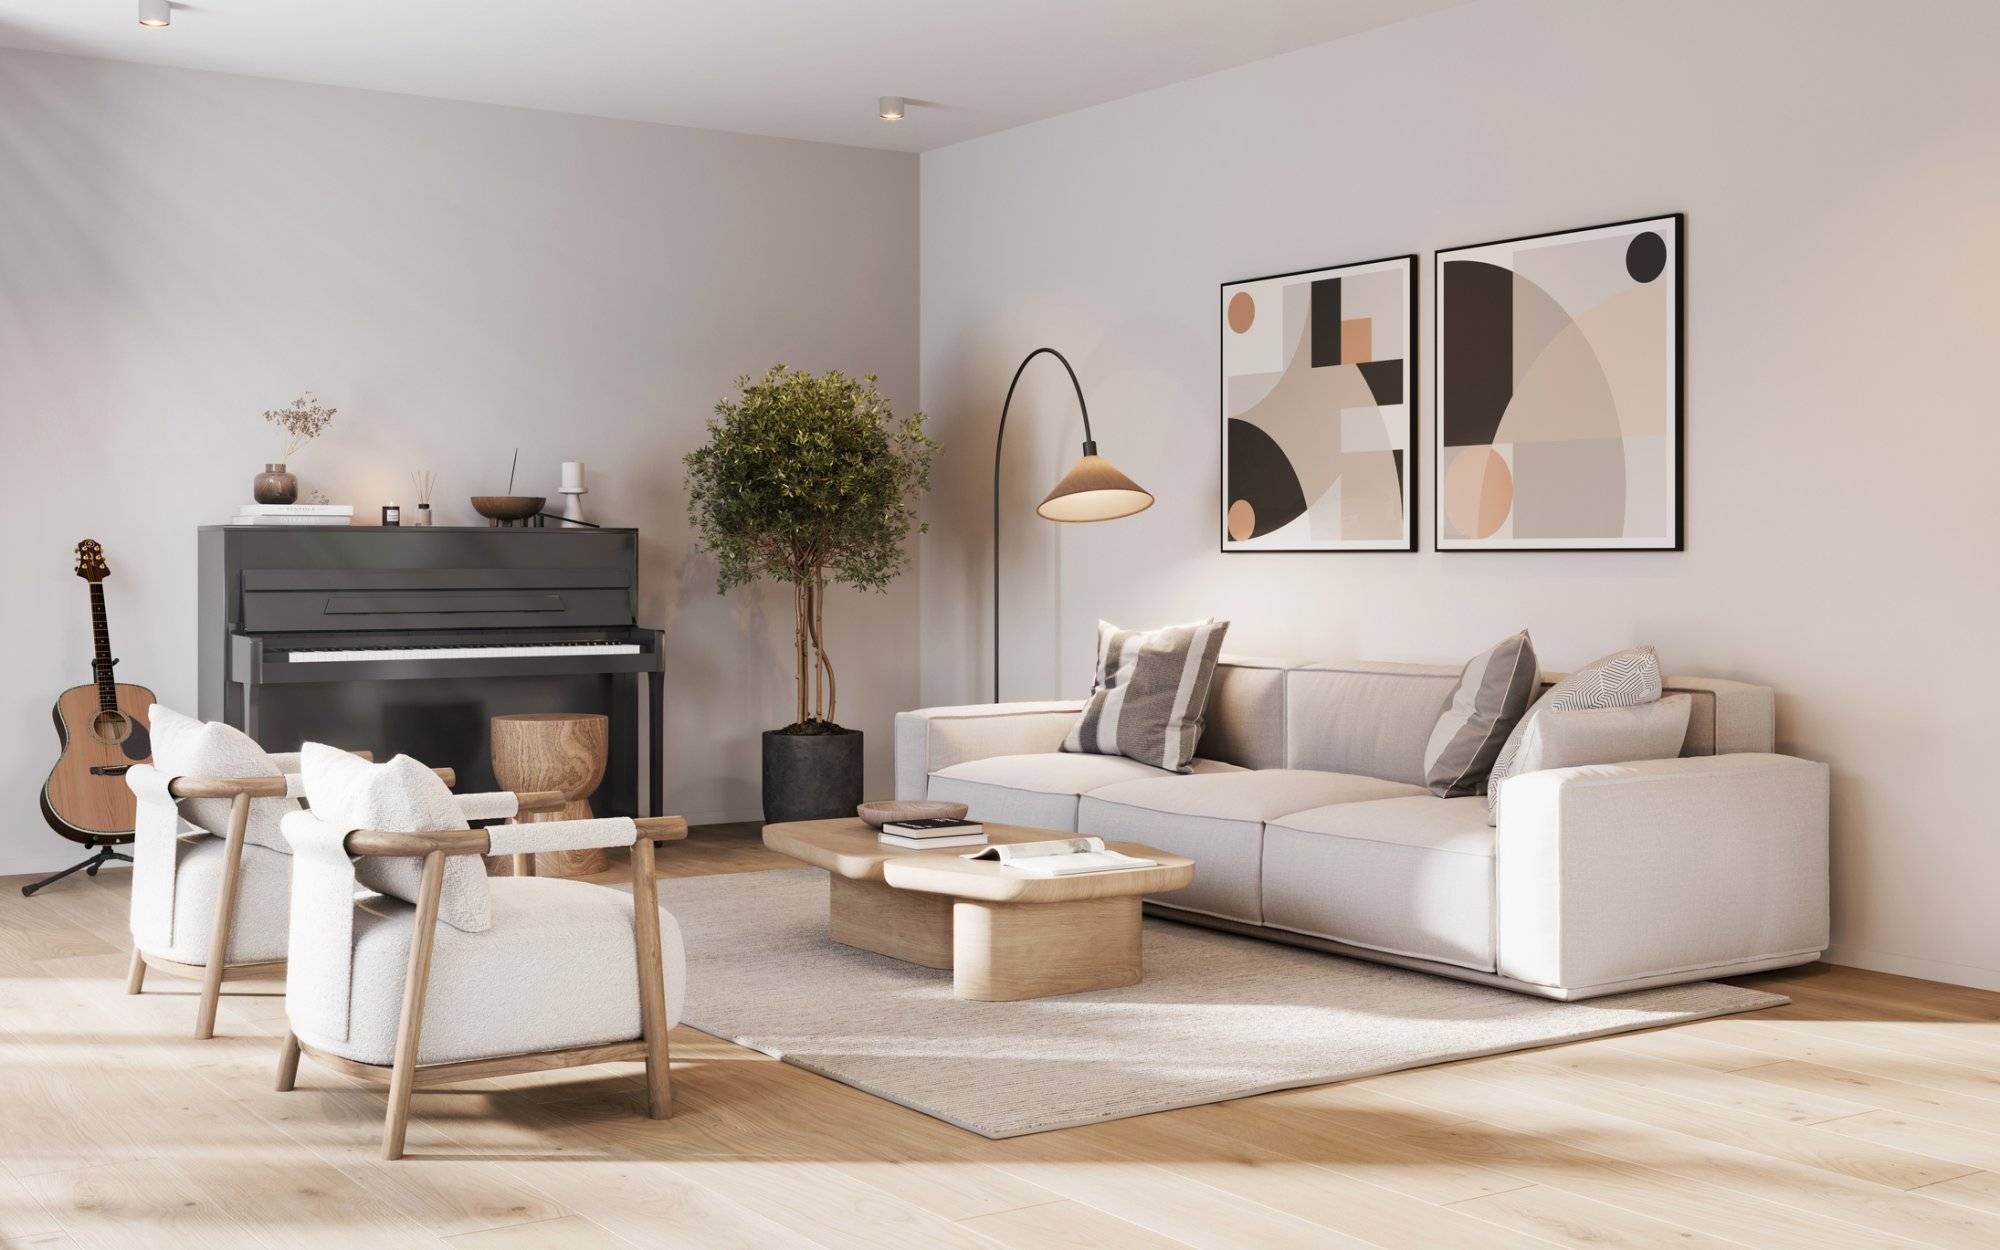 Revamp Your Home with Stylish Furniture from Home Living Furniture in Arlington